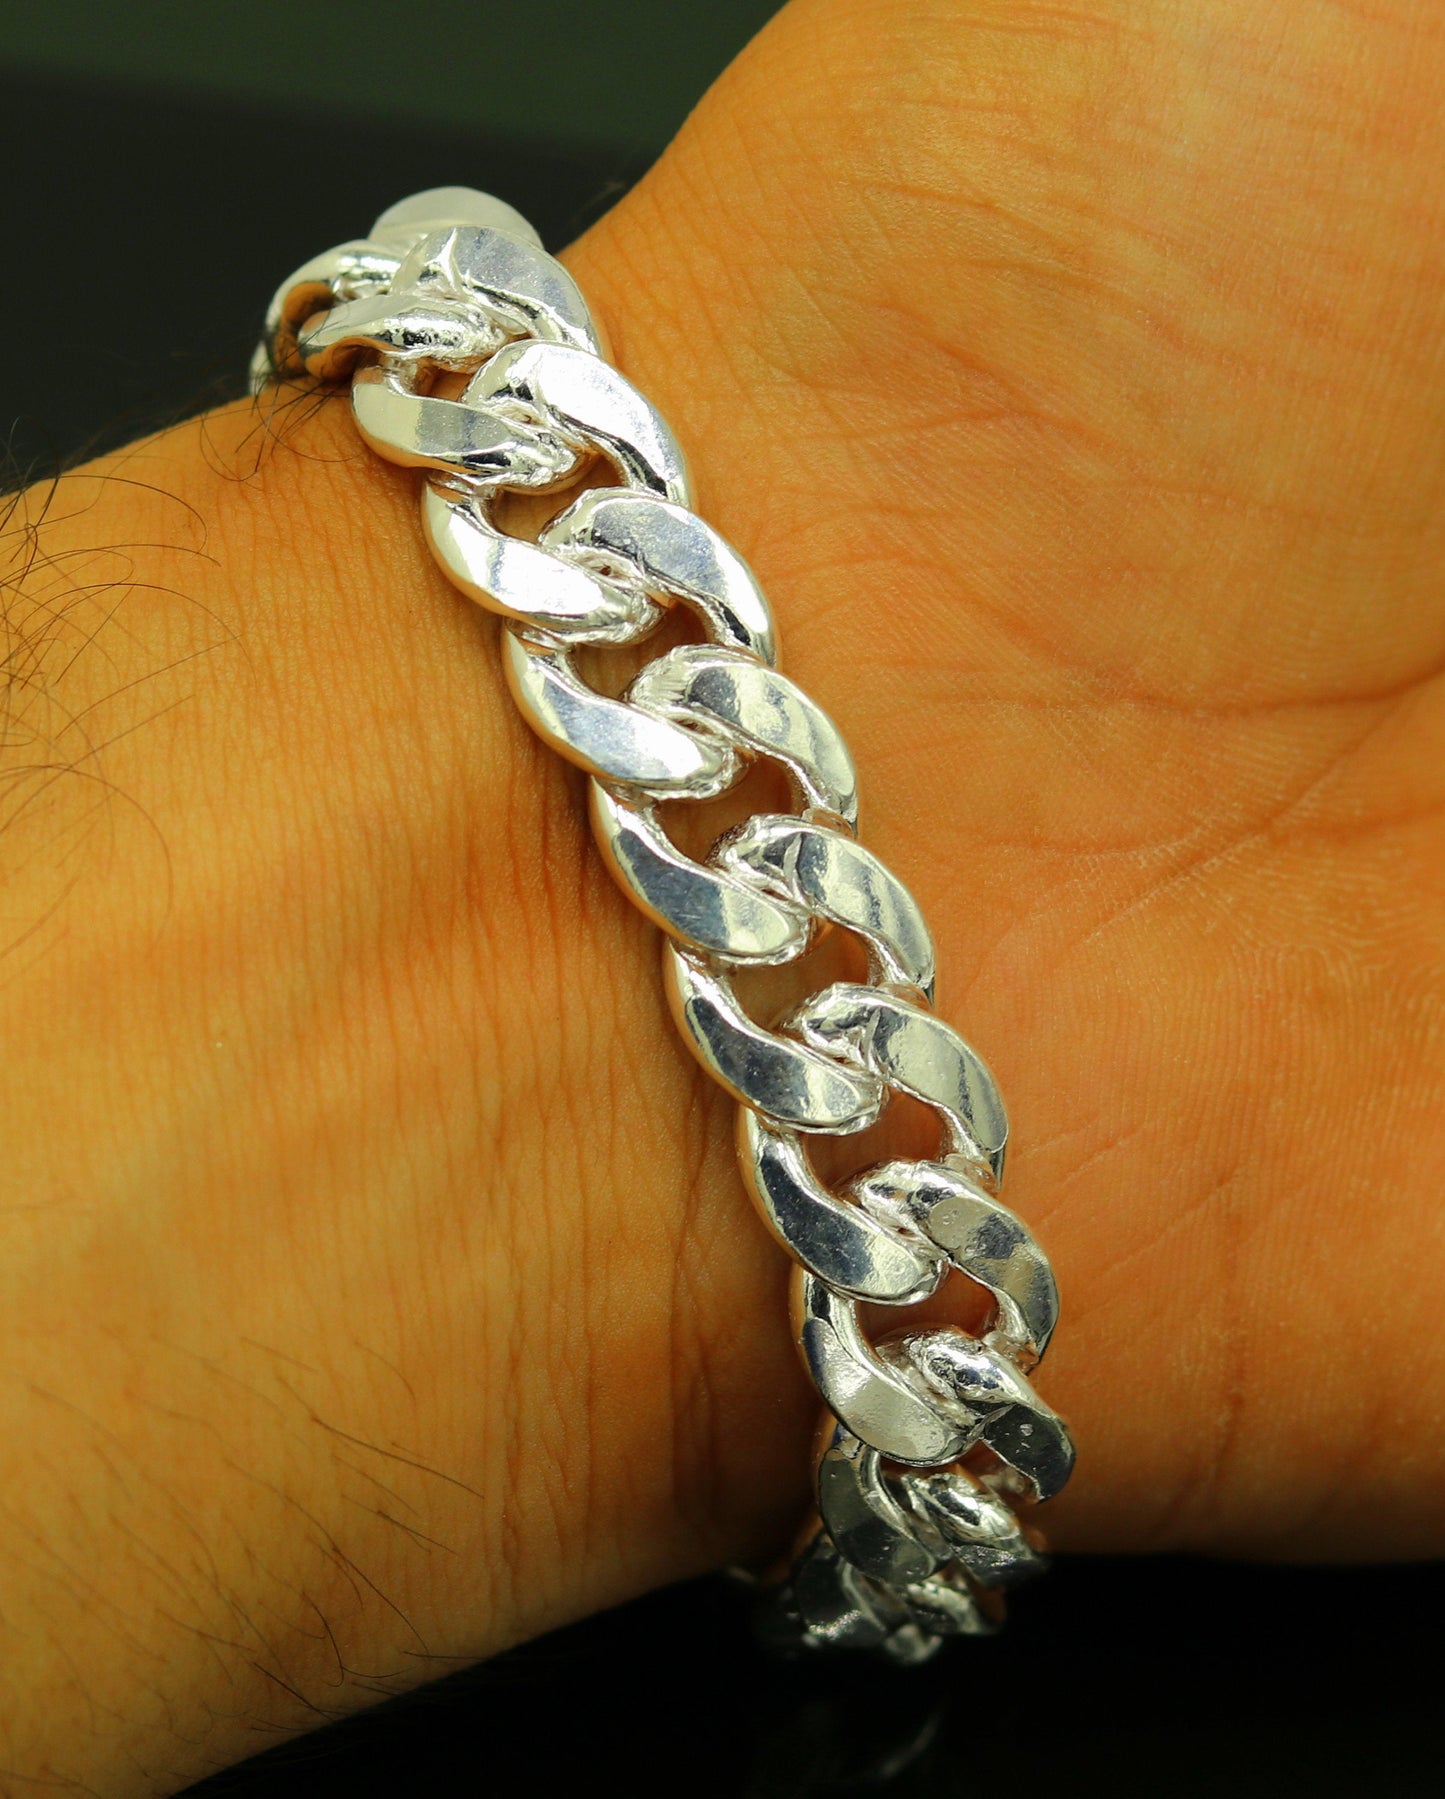 9" inches long Handmade solid silver customized heavy design unisex bracelet, gorgeous personalized gifting chain bracelet nsbr153 - TRIBAL ORNAMENTS